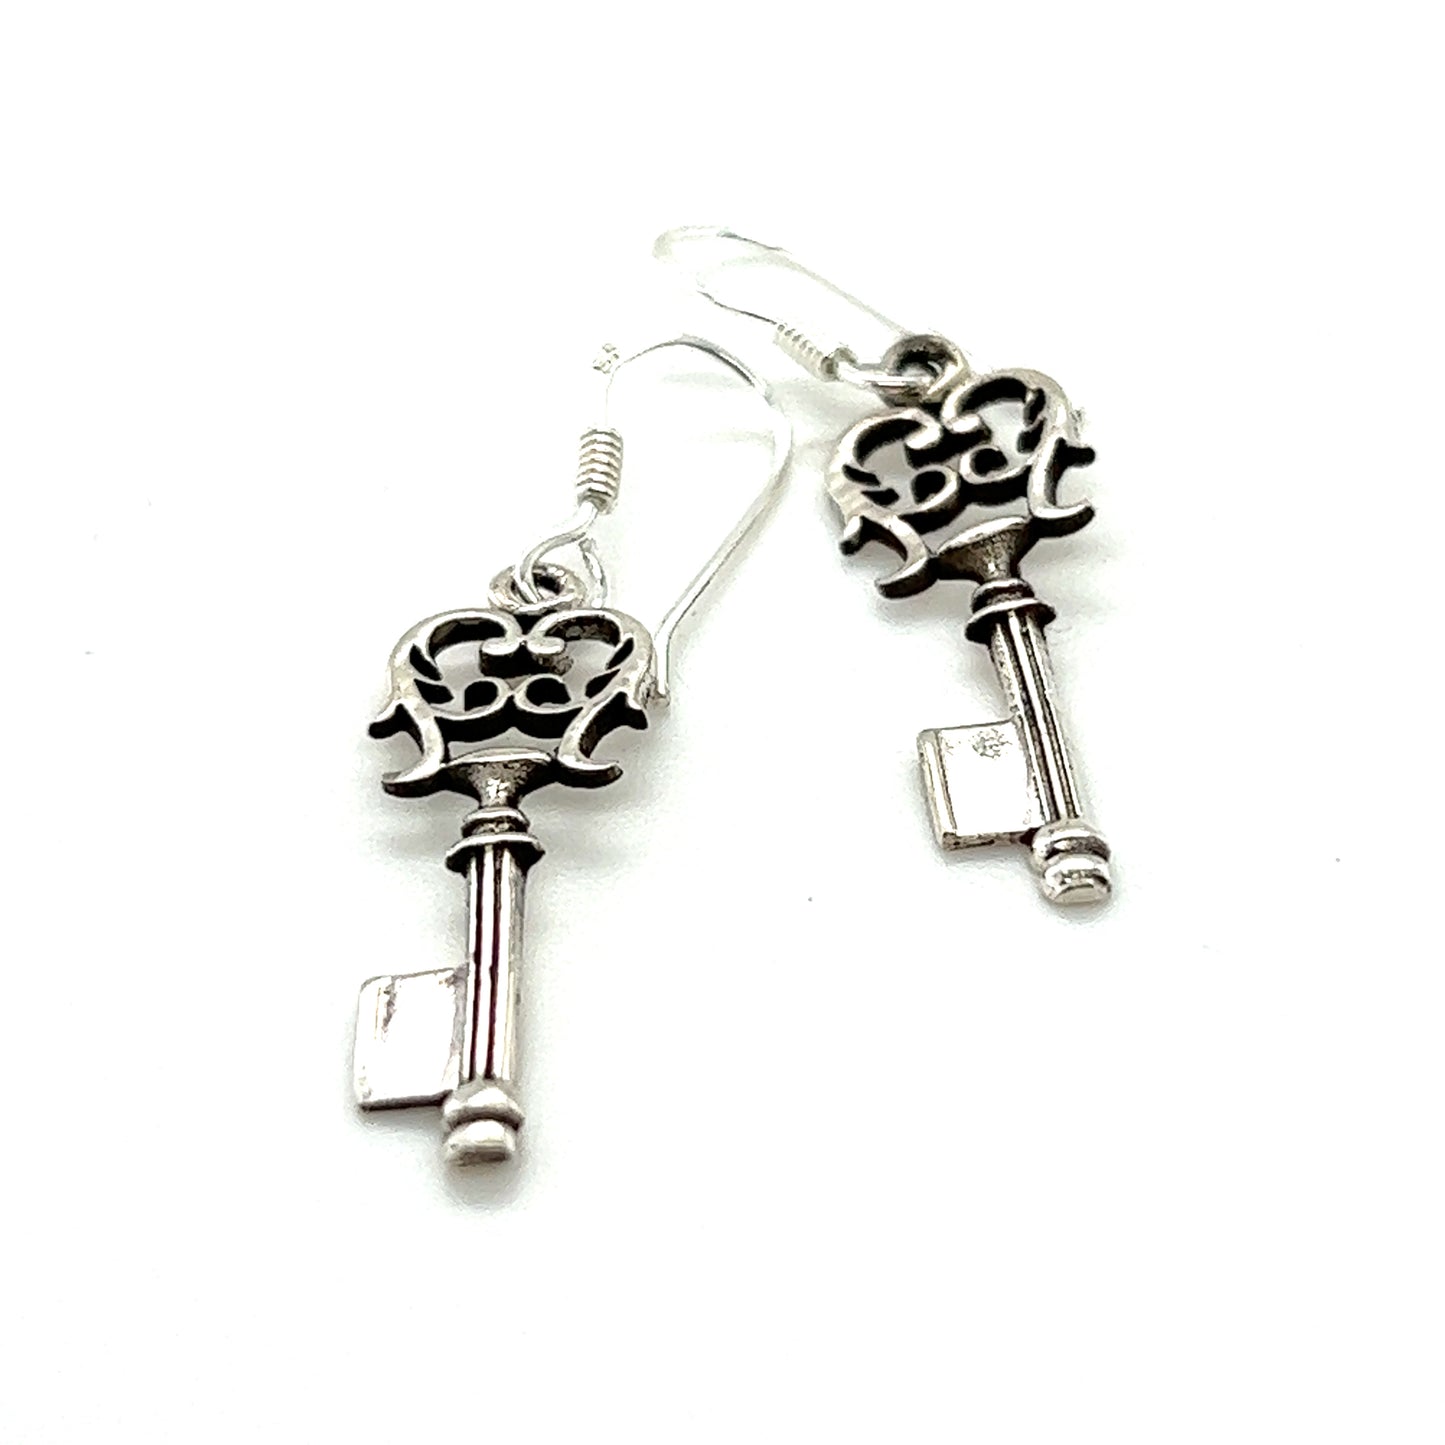 A pair of unique Super Silver .925 sterling silver Skeleton Key Earrings on a white background.